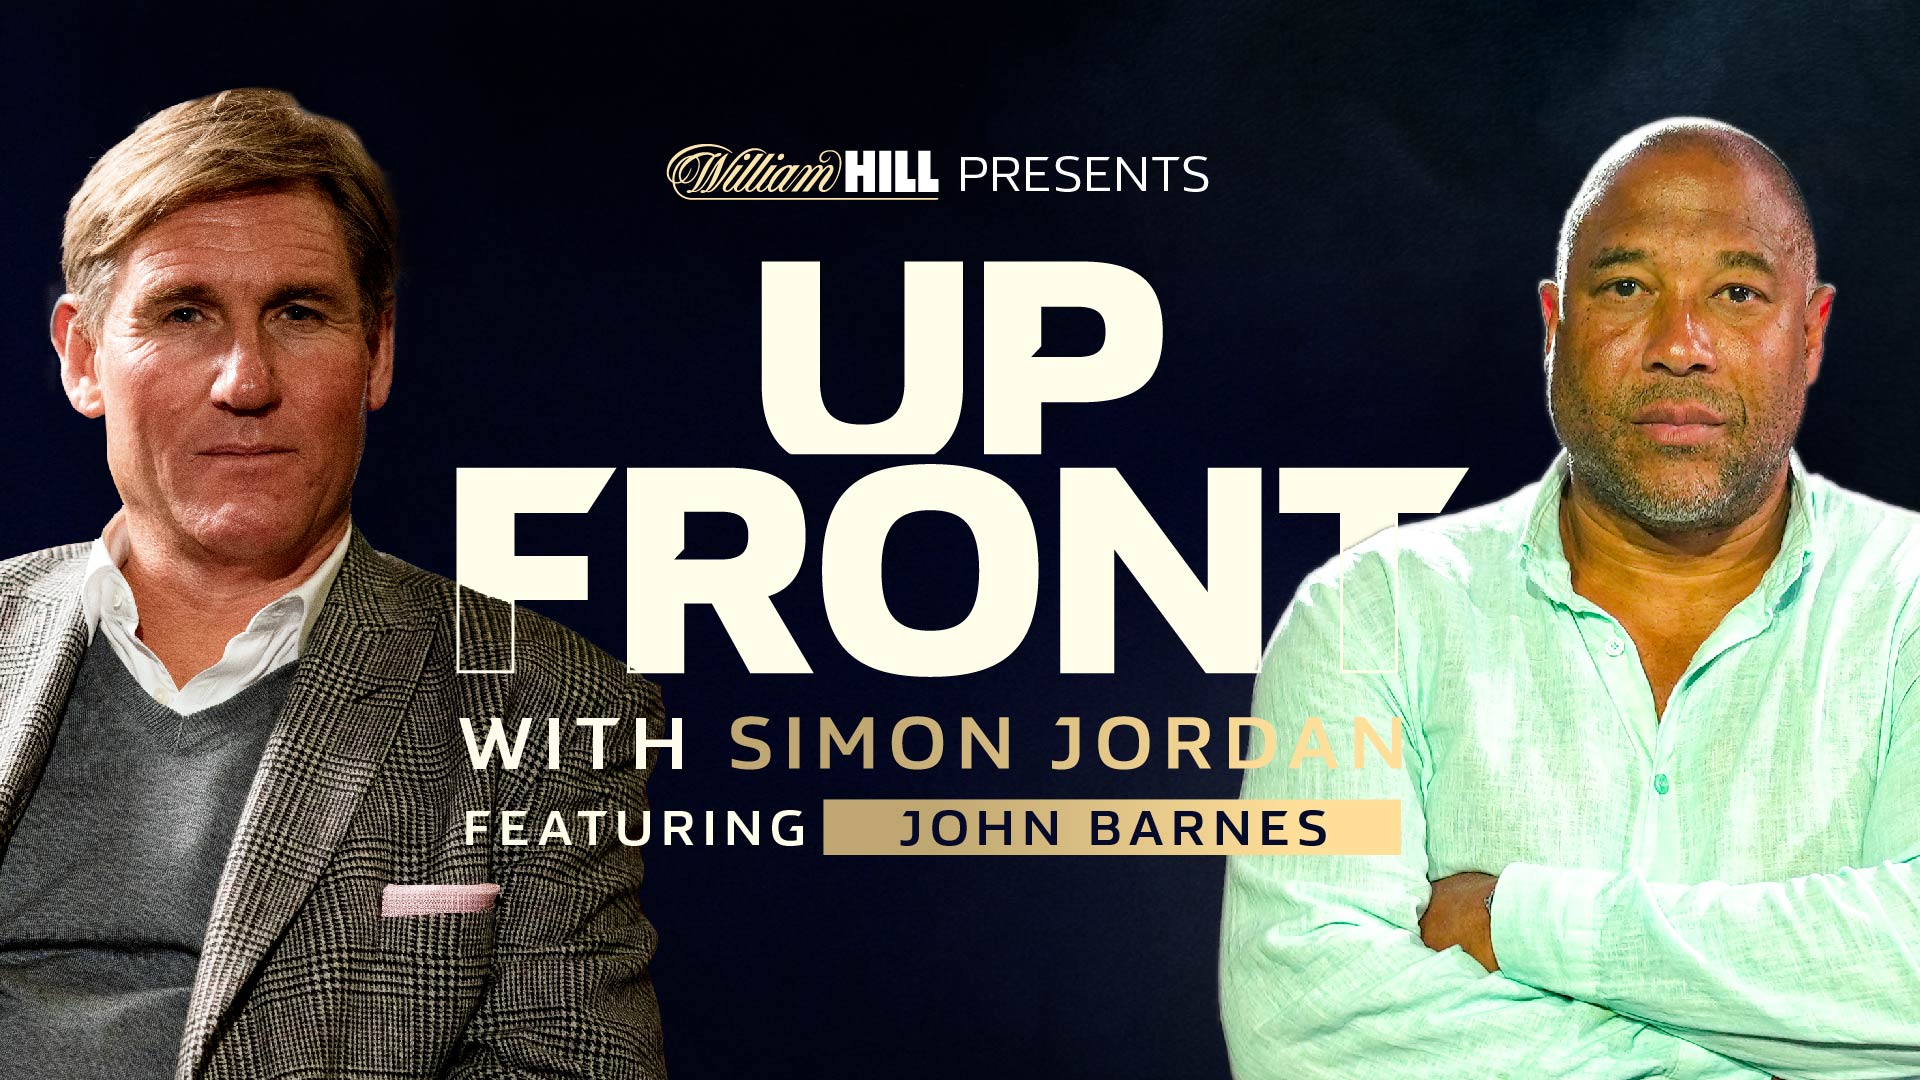 Up Front featuring John Barnes